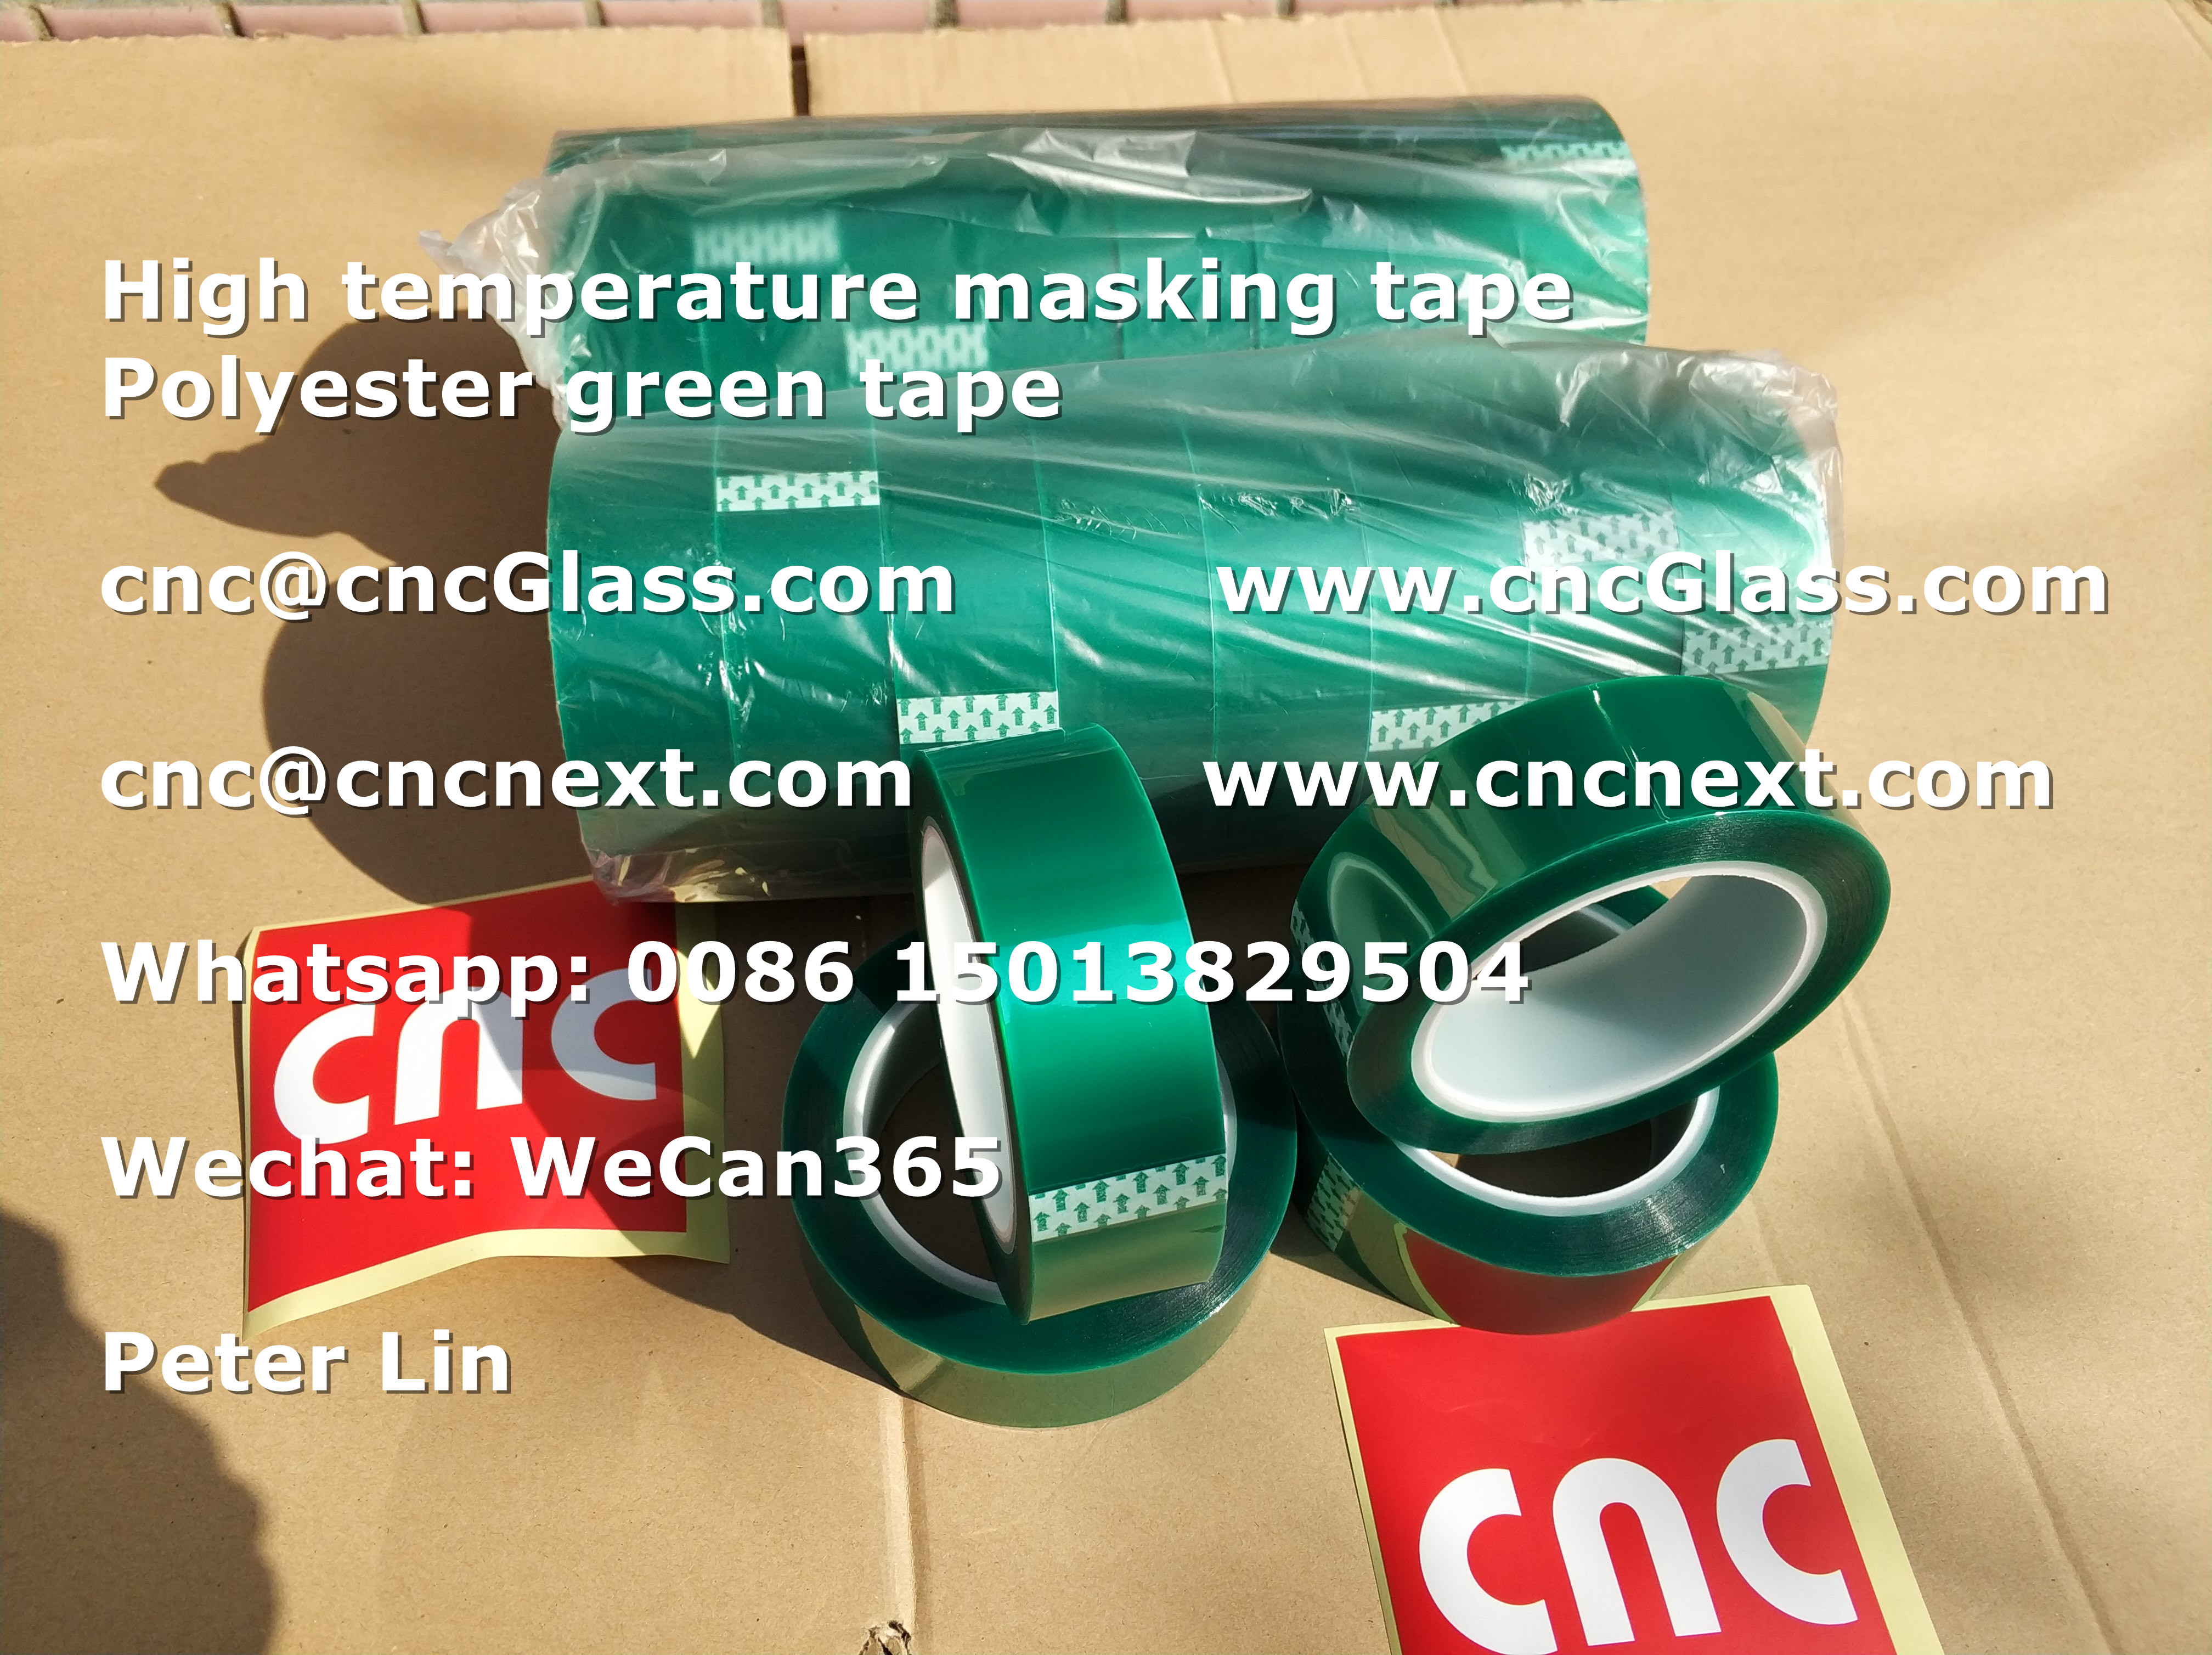 plyester green tape for high temperature masking (29)